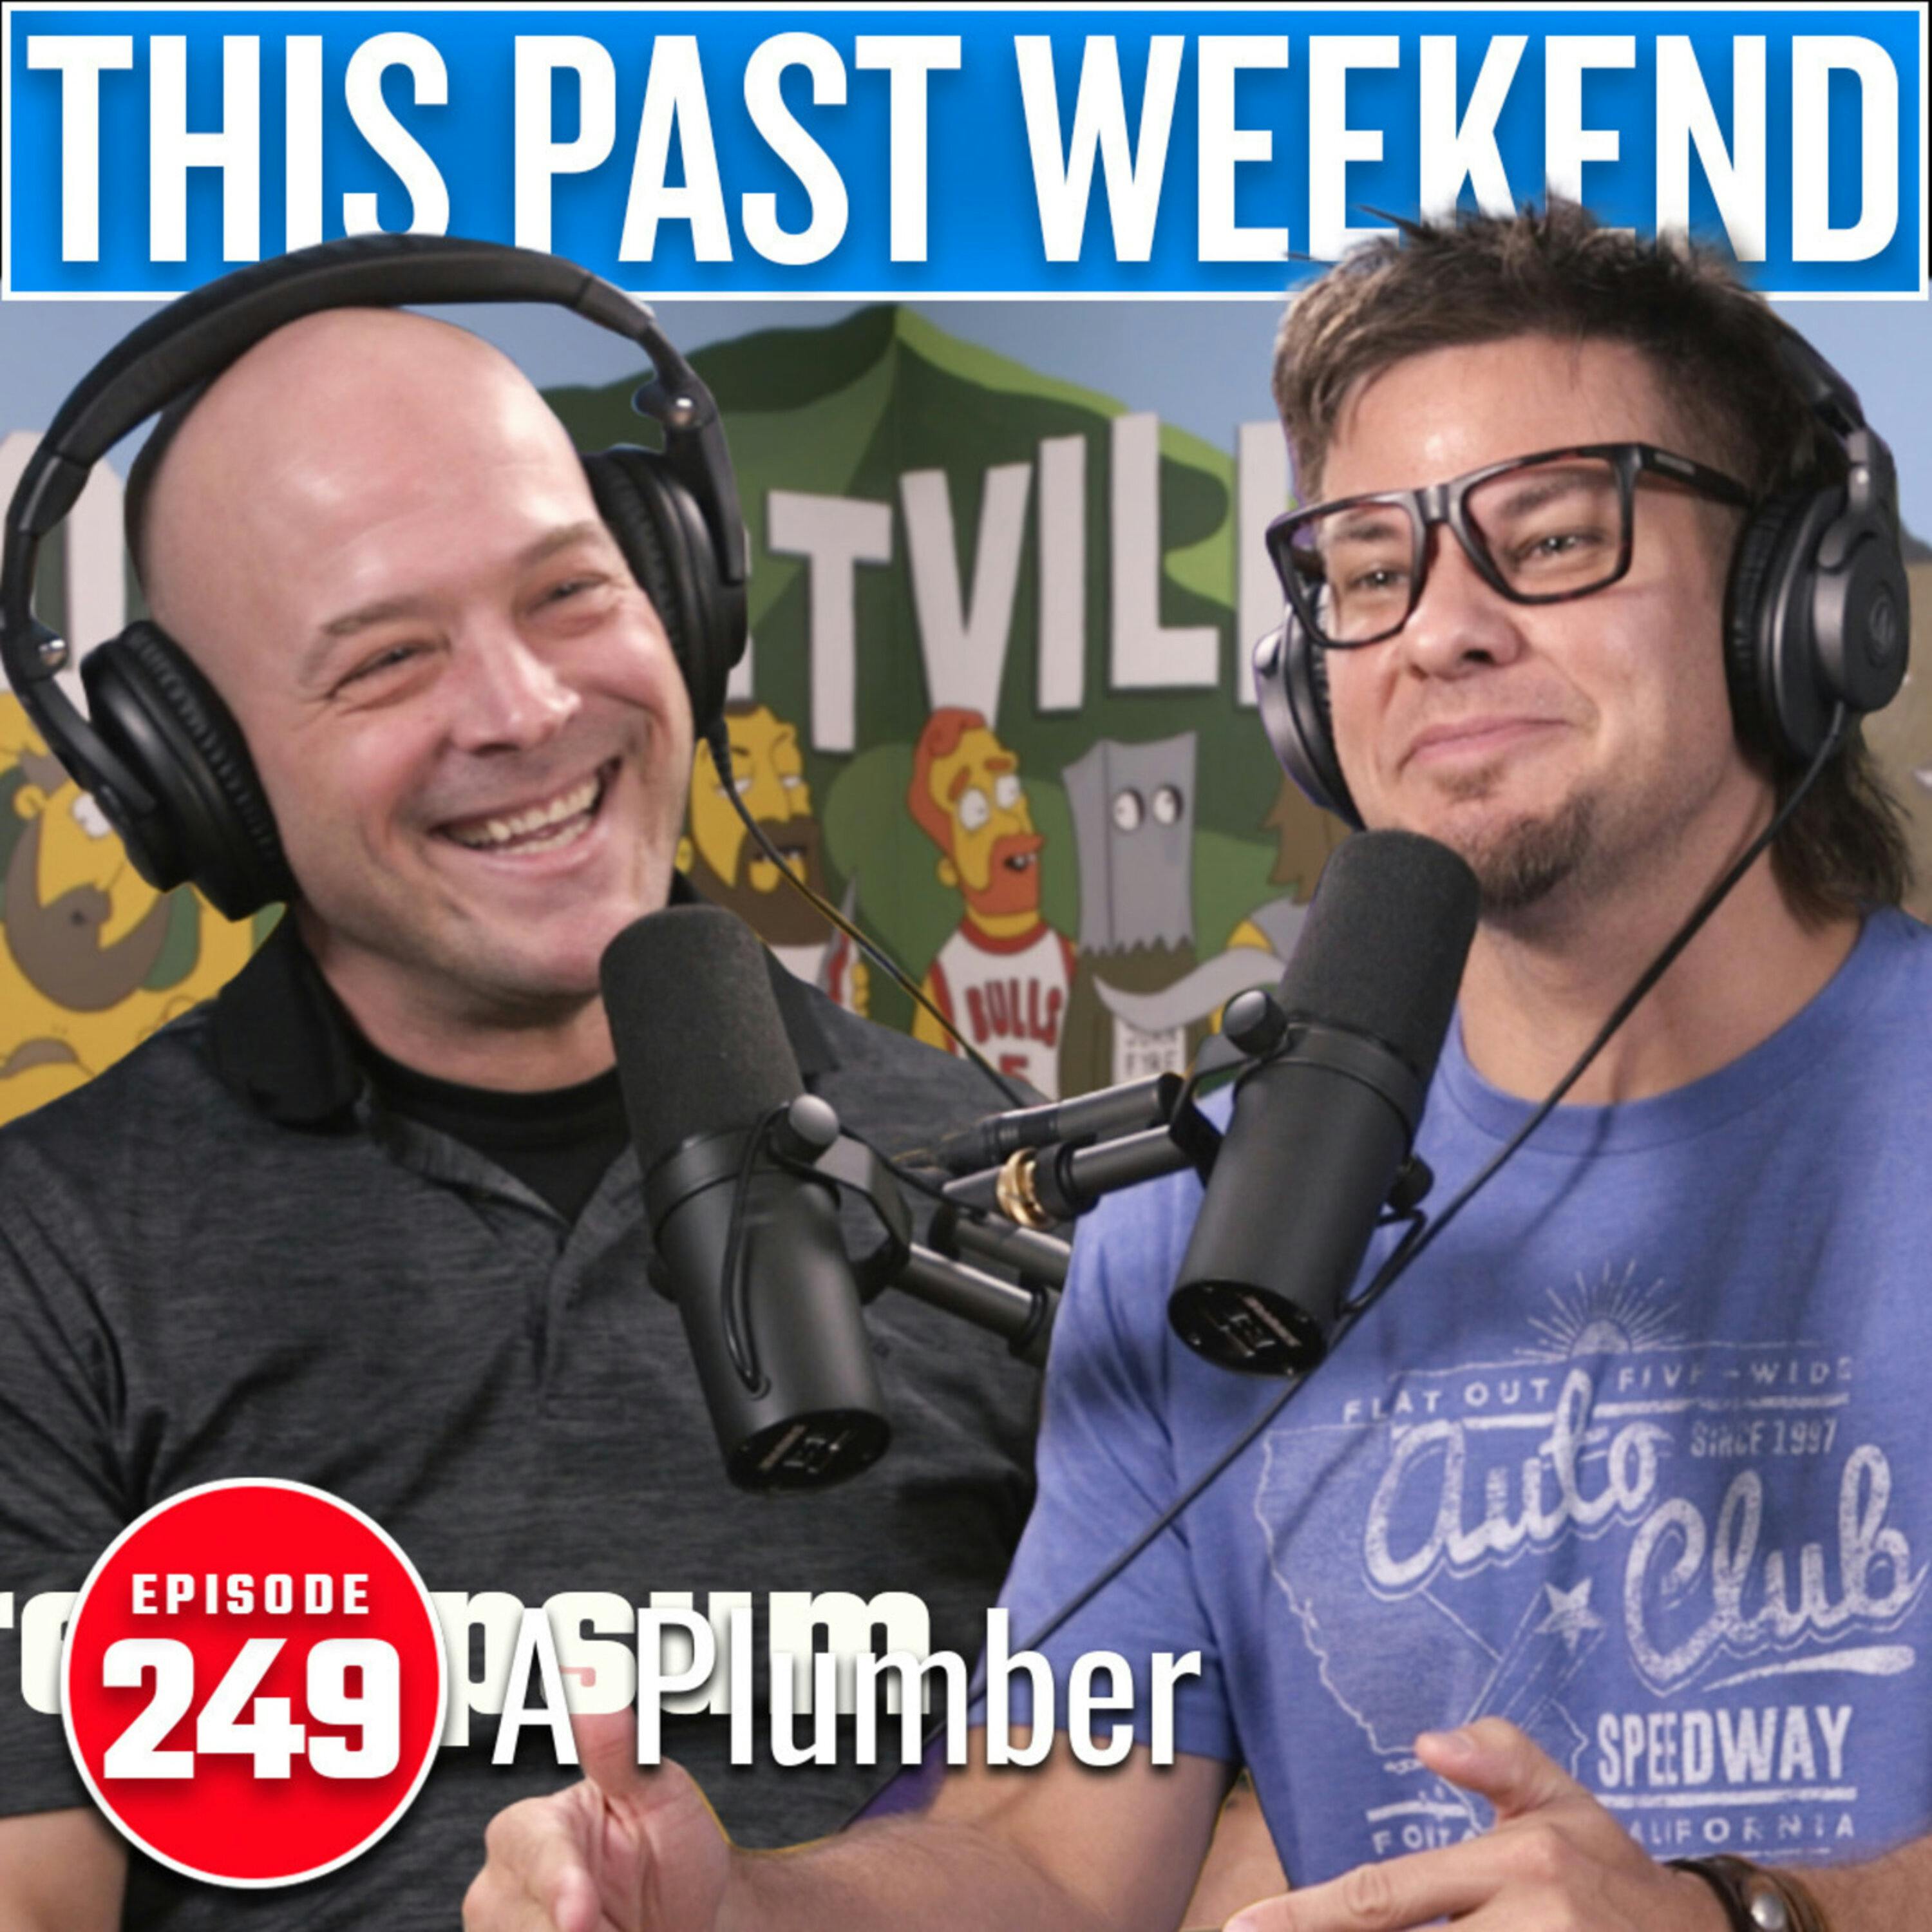 A Plumber | This Past Weekend #249